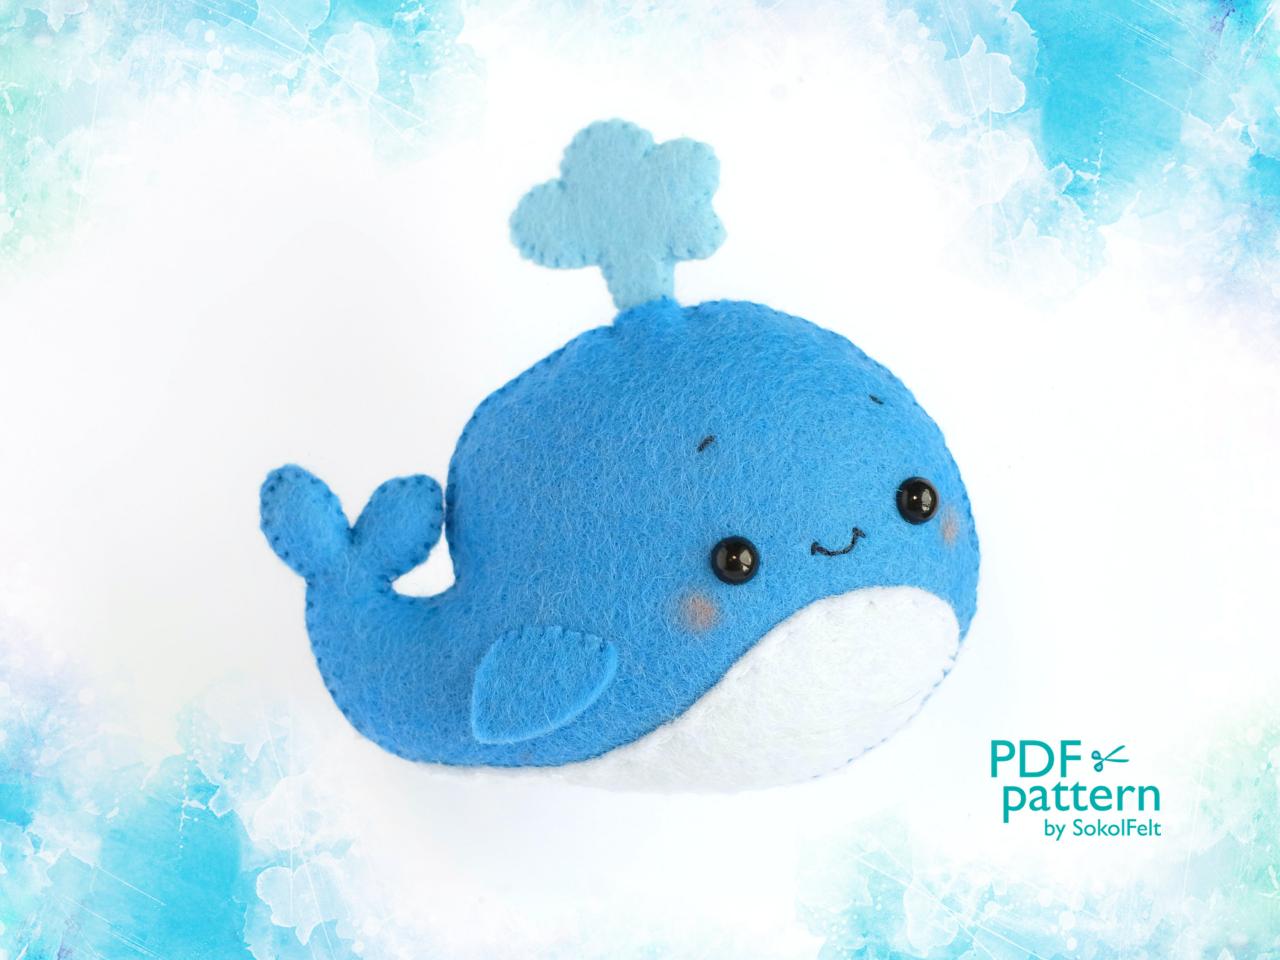 Blue Whale Toy Sewing Pdf Pattern, Felt Sea Ocean Animal Sewing Tutorial, Sea Life Baby Crib Mobile Toy, Under The Sea Nursery Decoration